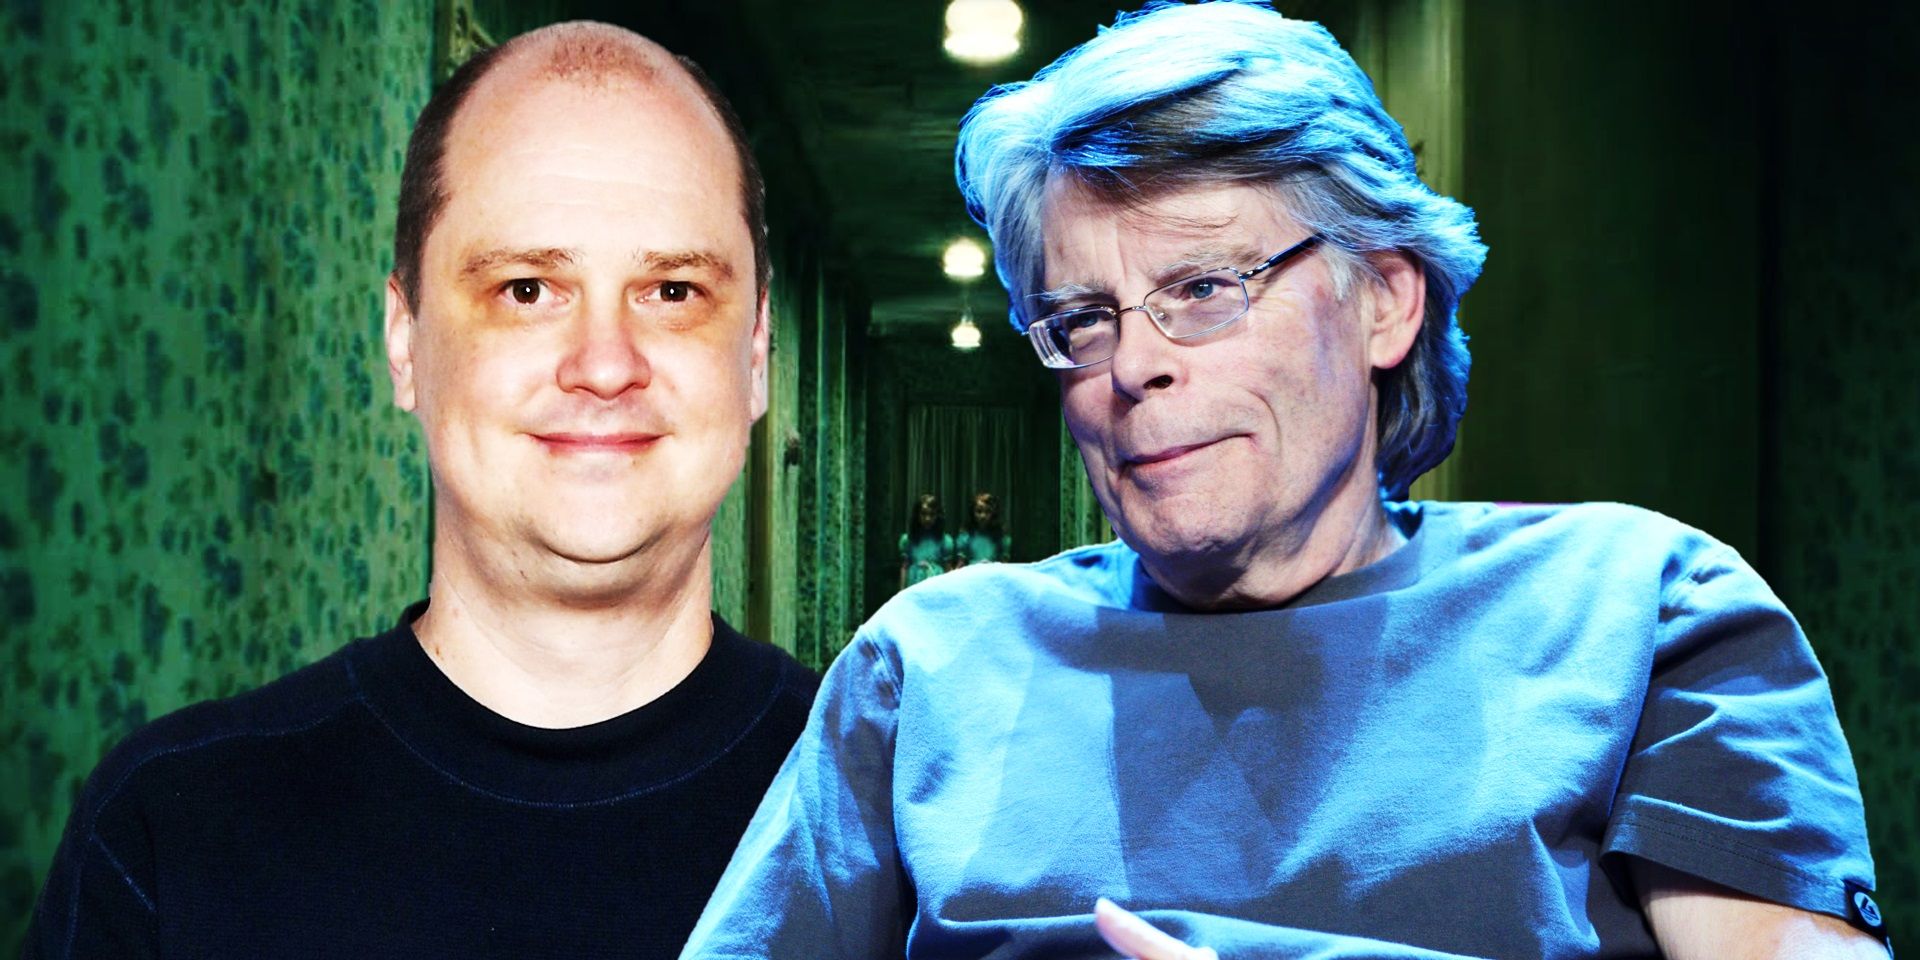 Mike Flanagans Netflix Horror Shows Hint At A Twist For His Upcoming Stephen King Movie